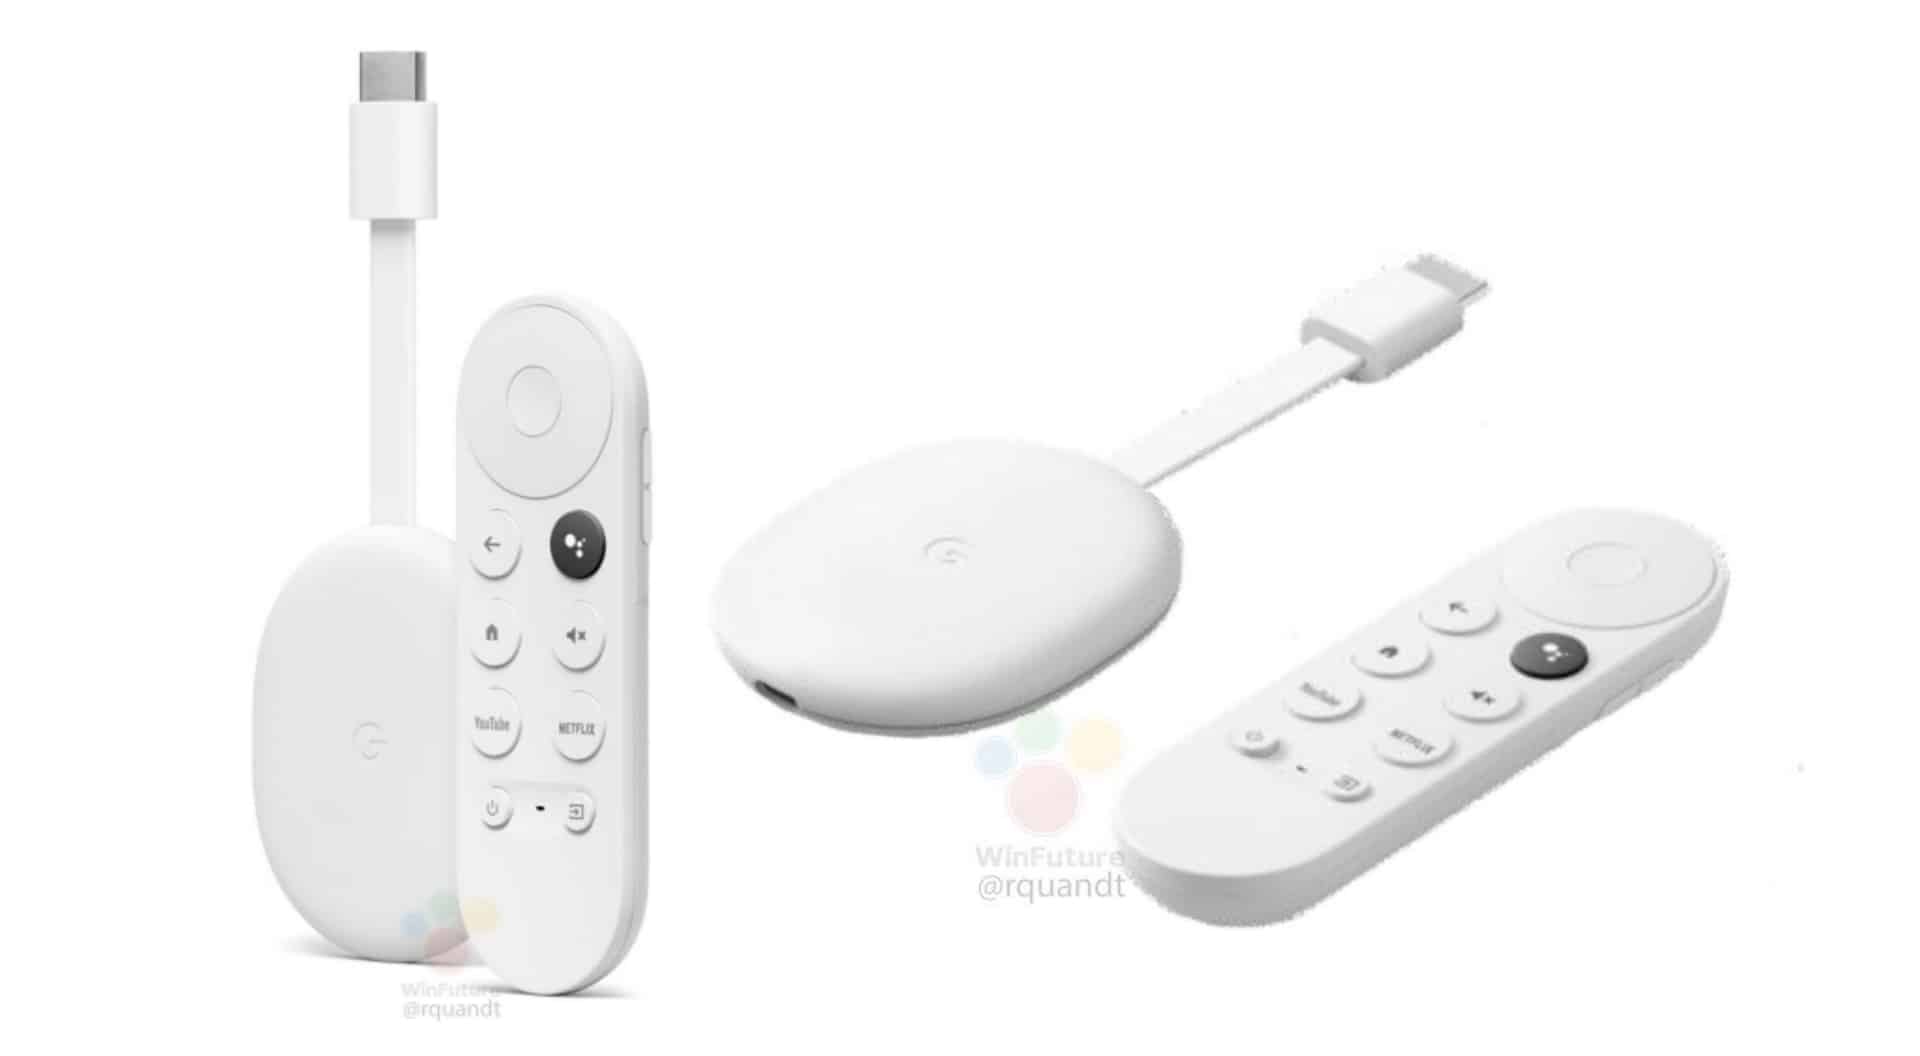 Chromecast with Google TV Renders, Price, Specs Surface Online Ahead of Launch